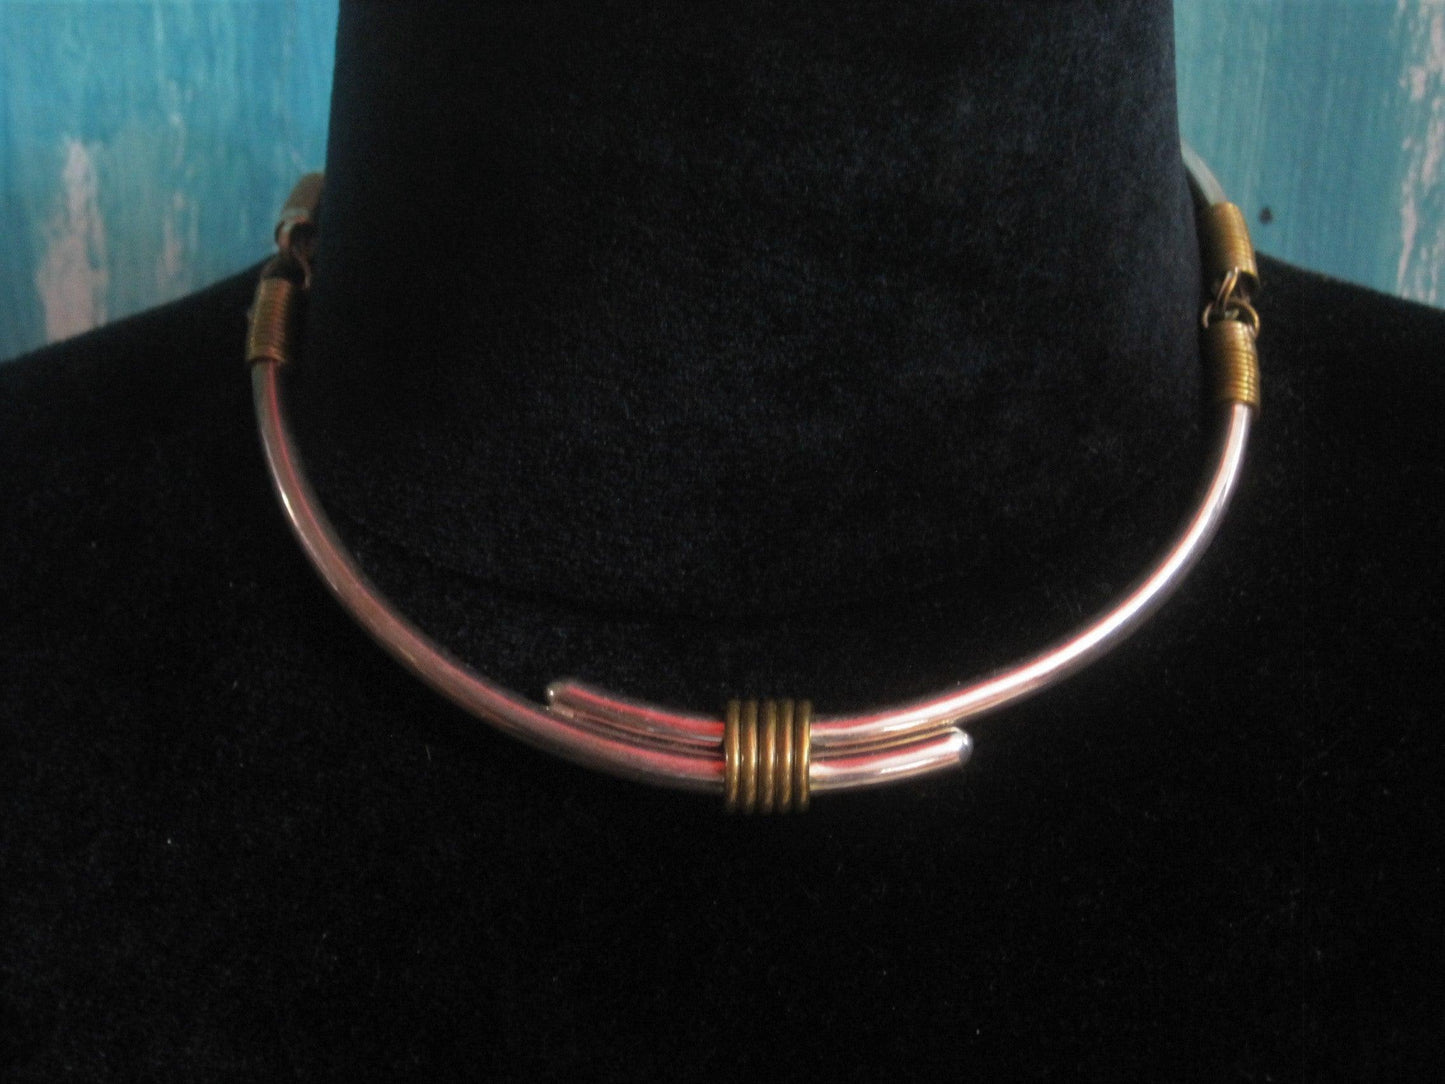 Vintage Mexican Choker Necklace Sterling Silver with Brass Accents - Anteeka